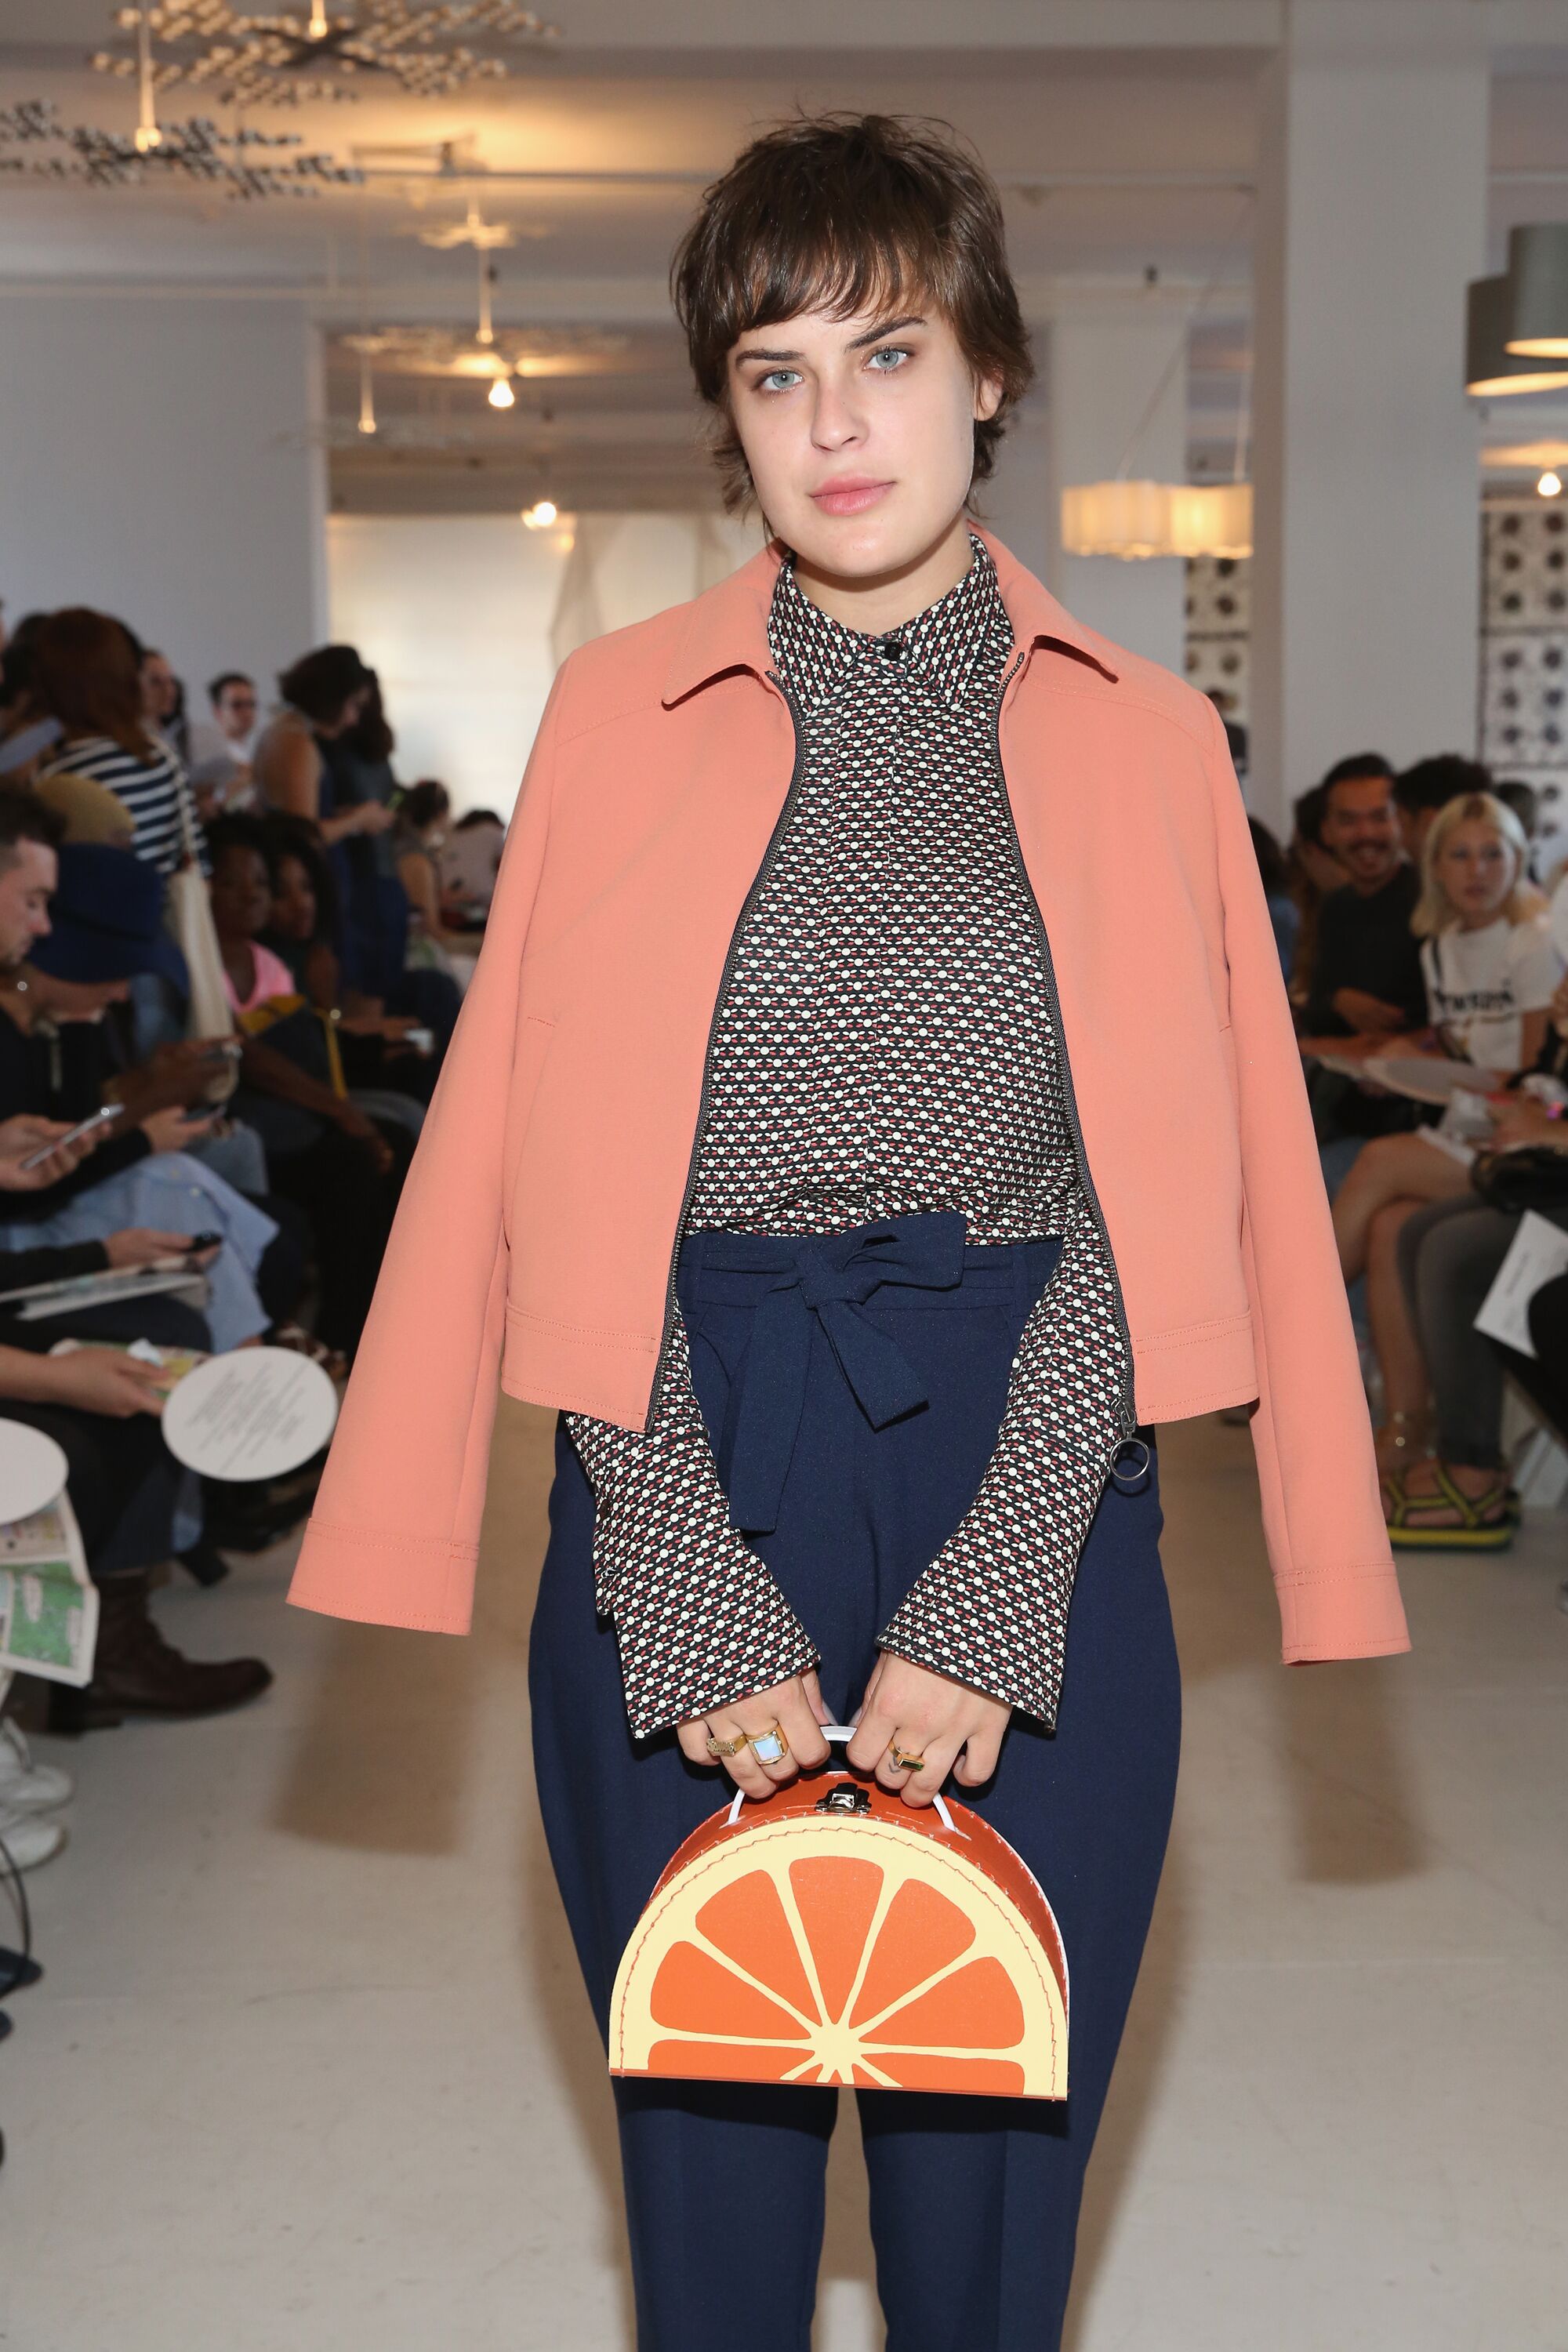 Tallulah Willis attends the Eckhaus Latta fashion show during Spring 2016 New York Fashion Week. | Source: Getty Images